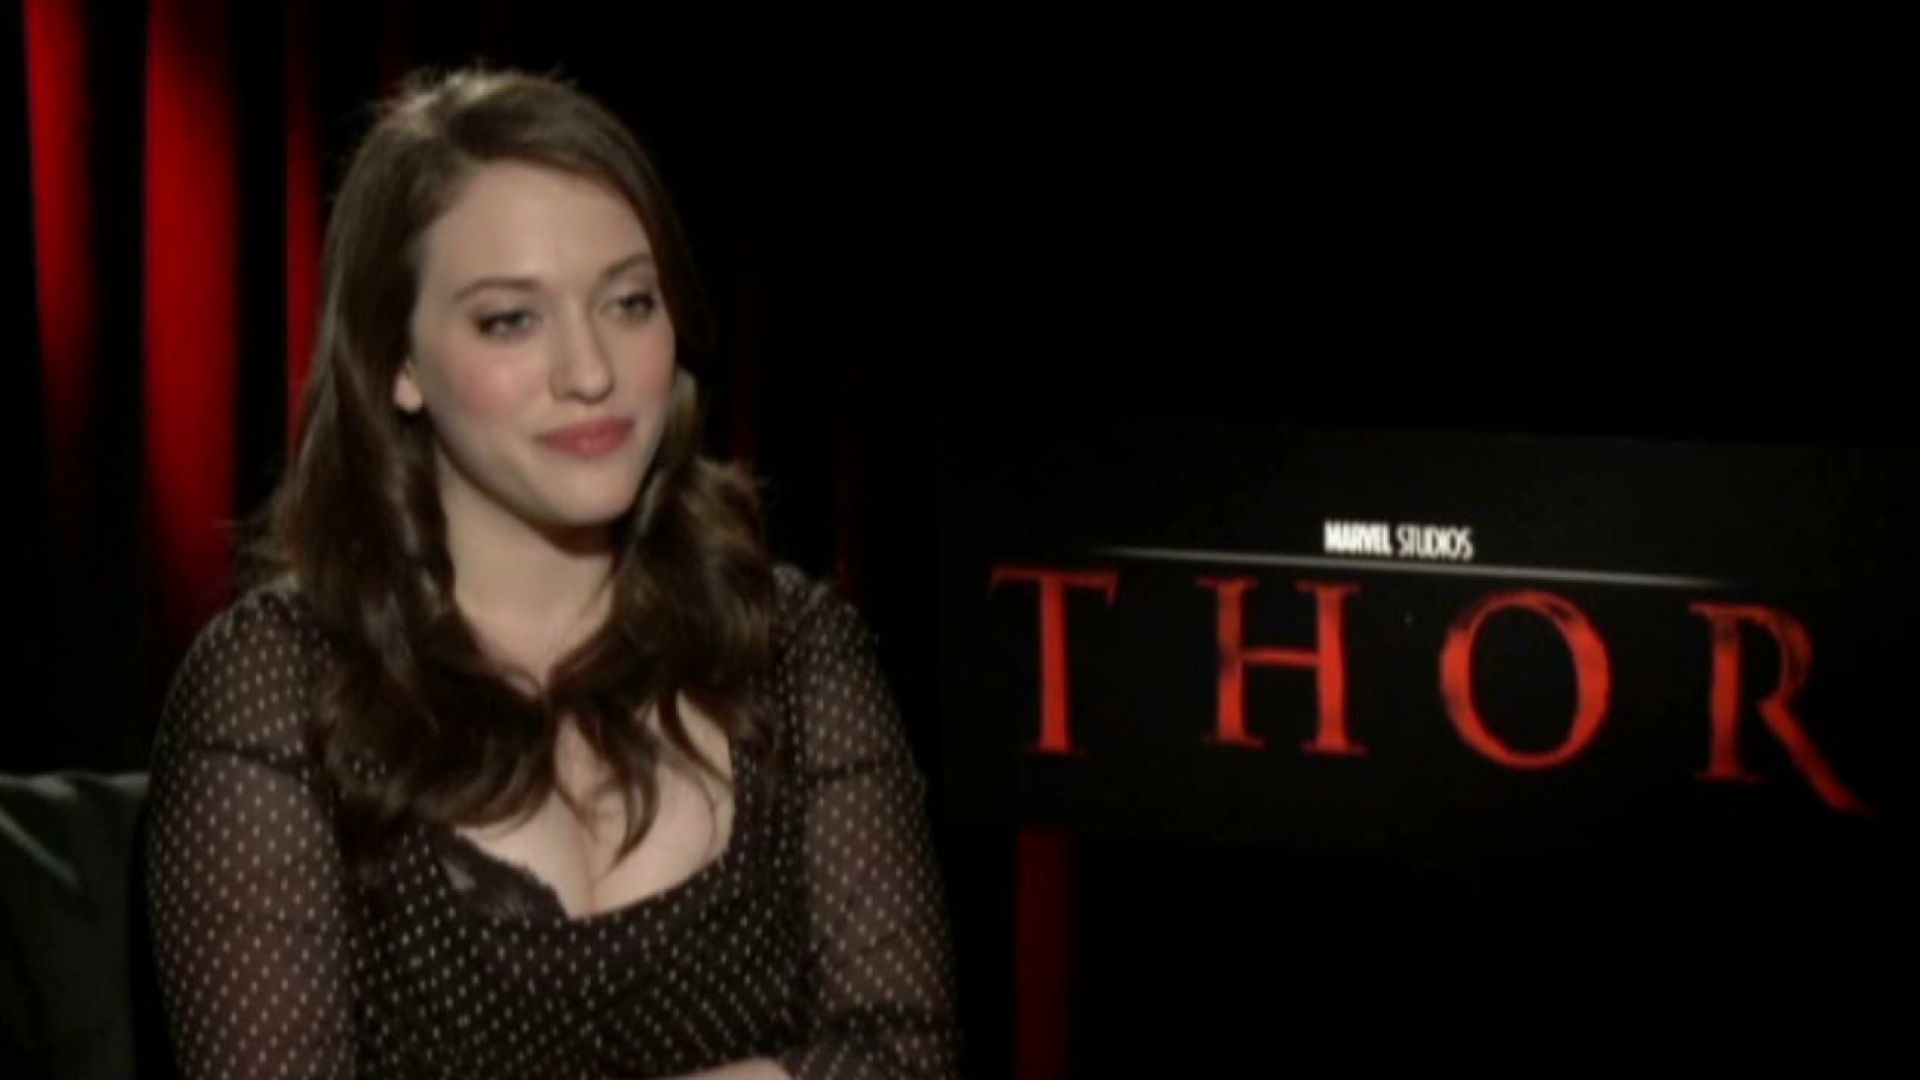 Kat Dennings talks about her role in Thor